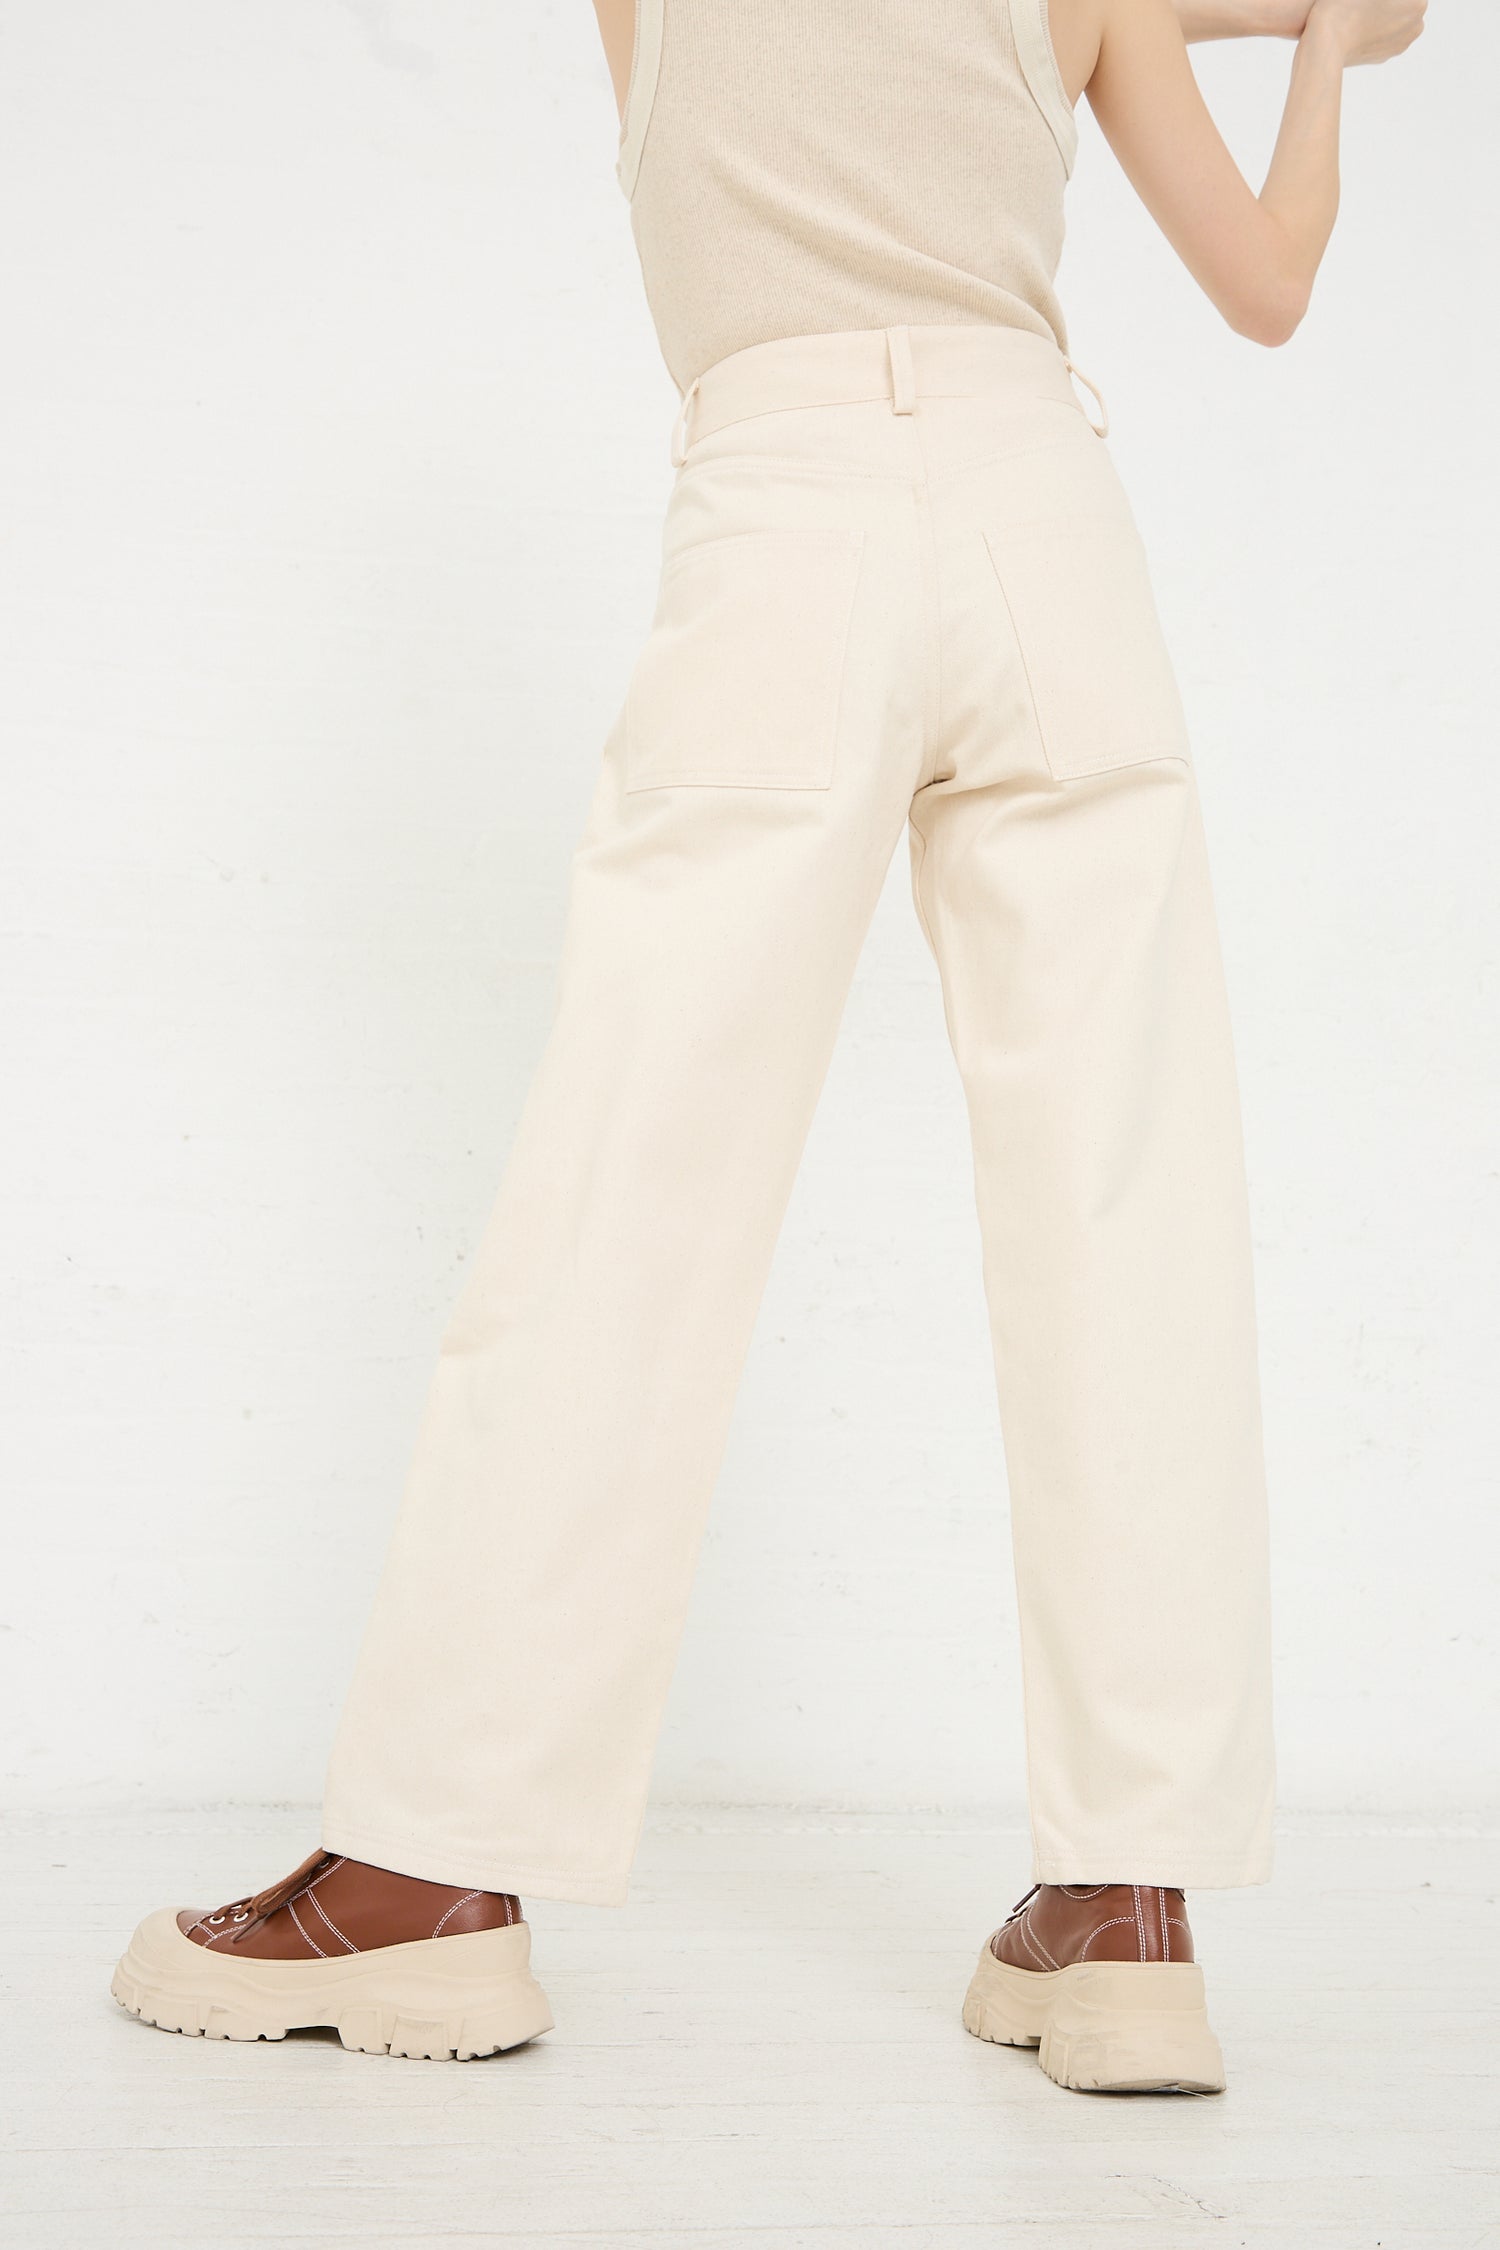 Woman standing in Baserange's Organic Cotton Indre Pant in Undyed and two-tone brown platform shoes, with a partial view of a beige top.